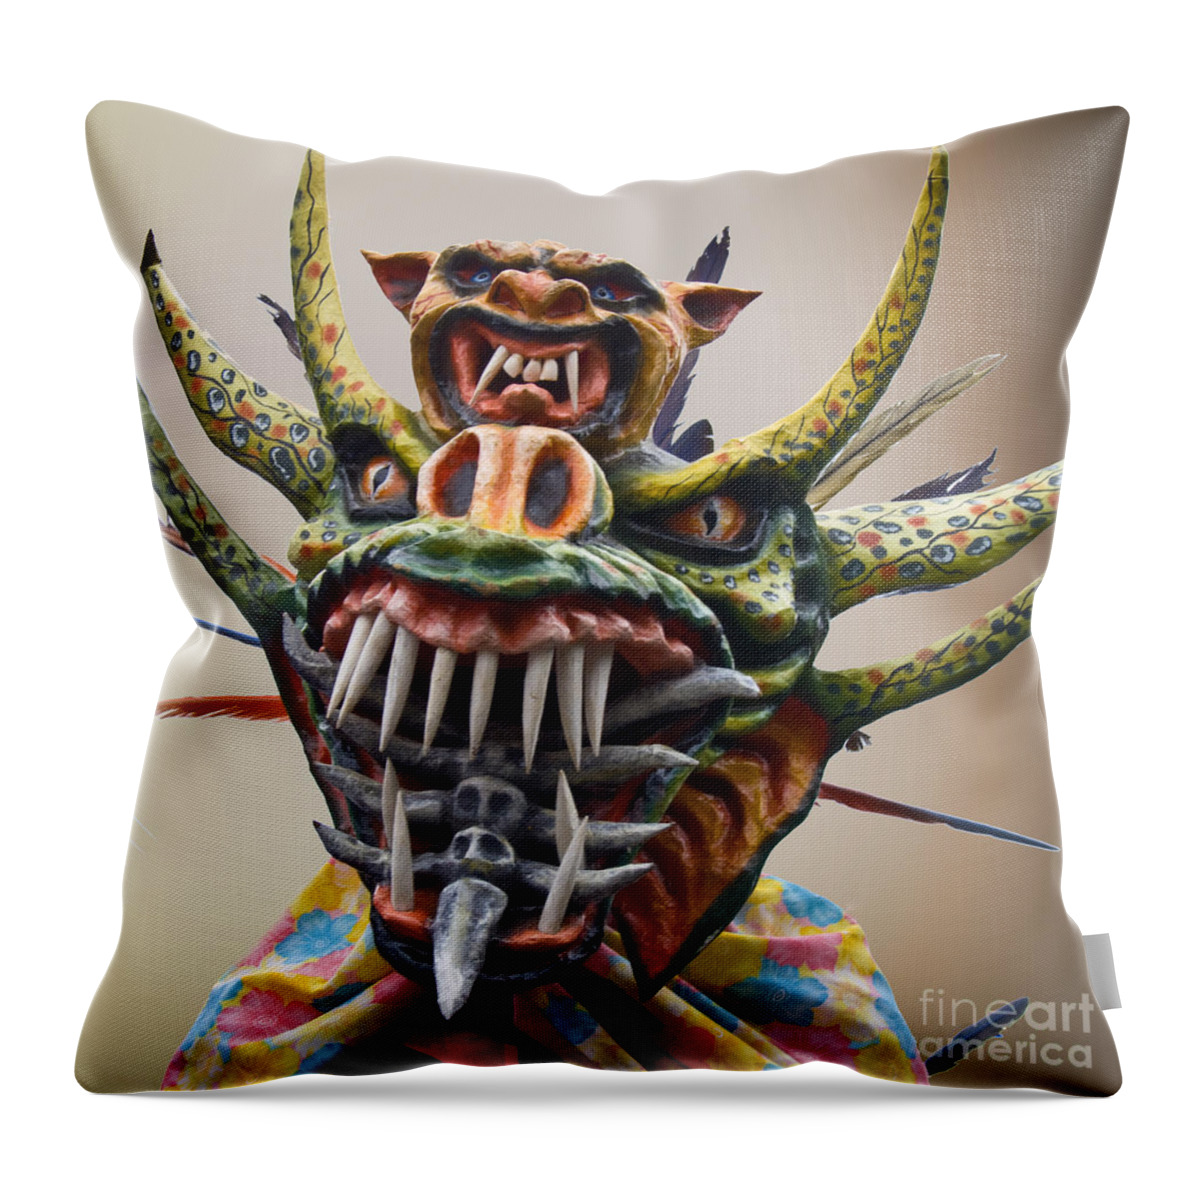 Mask Throw Pillow featuring the photograph La Mascarada by Heiko Koehrer-Wagner